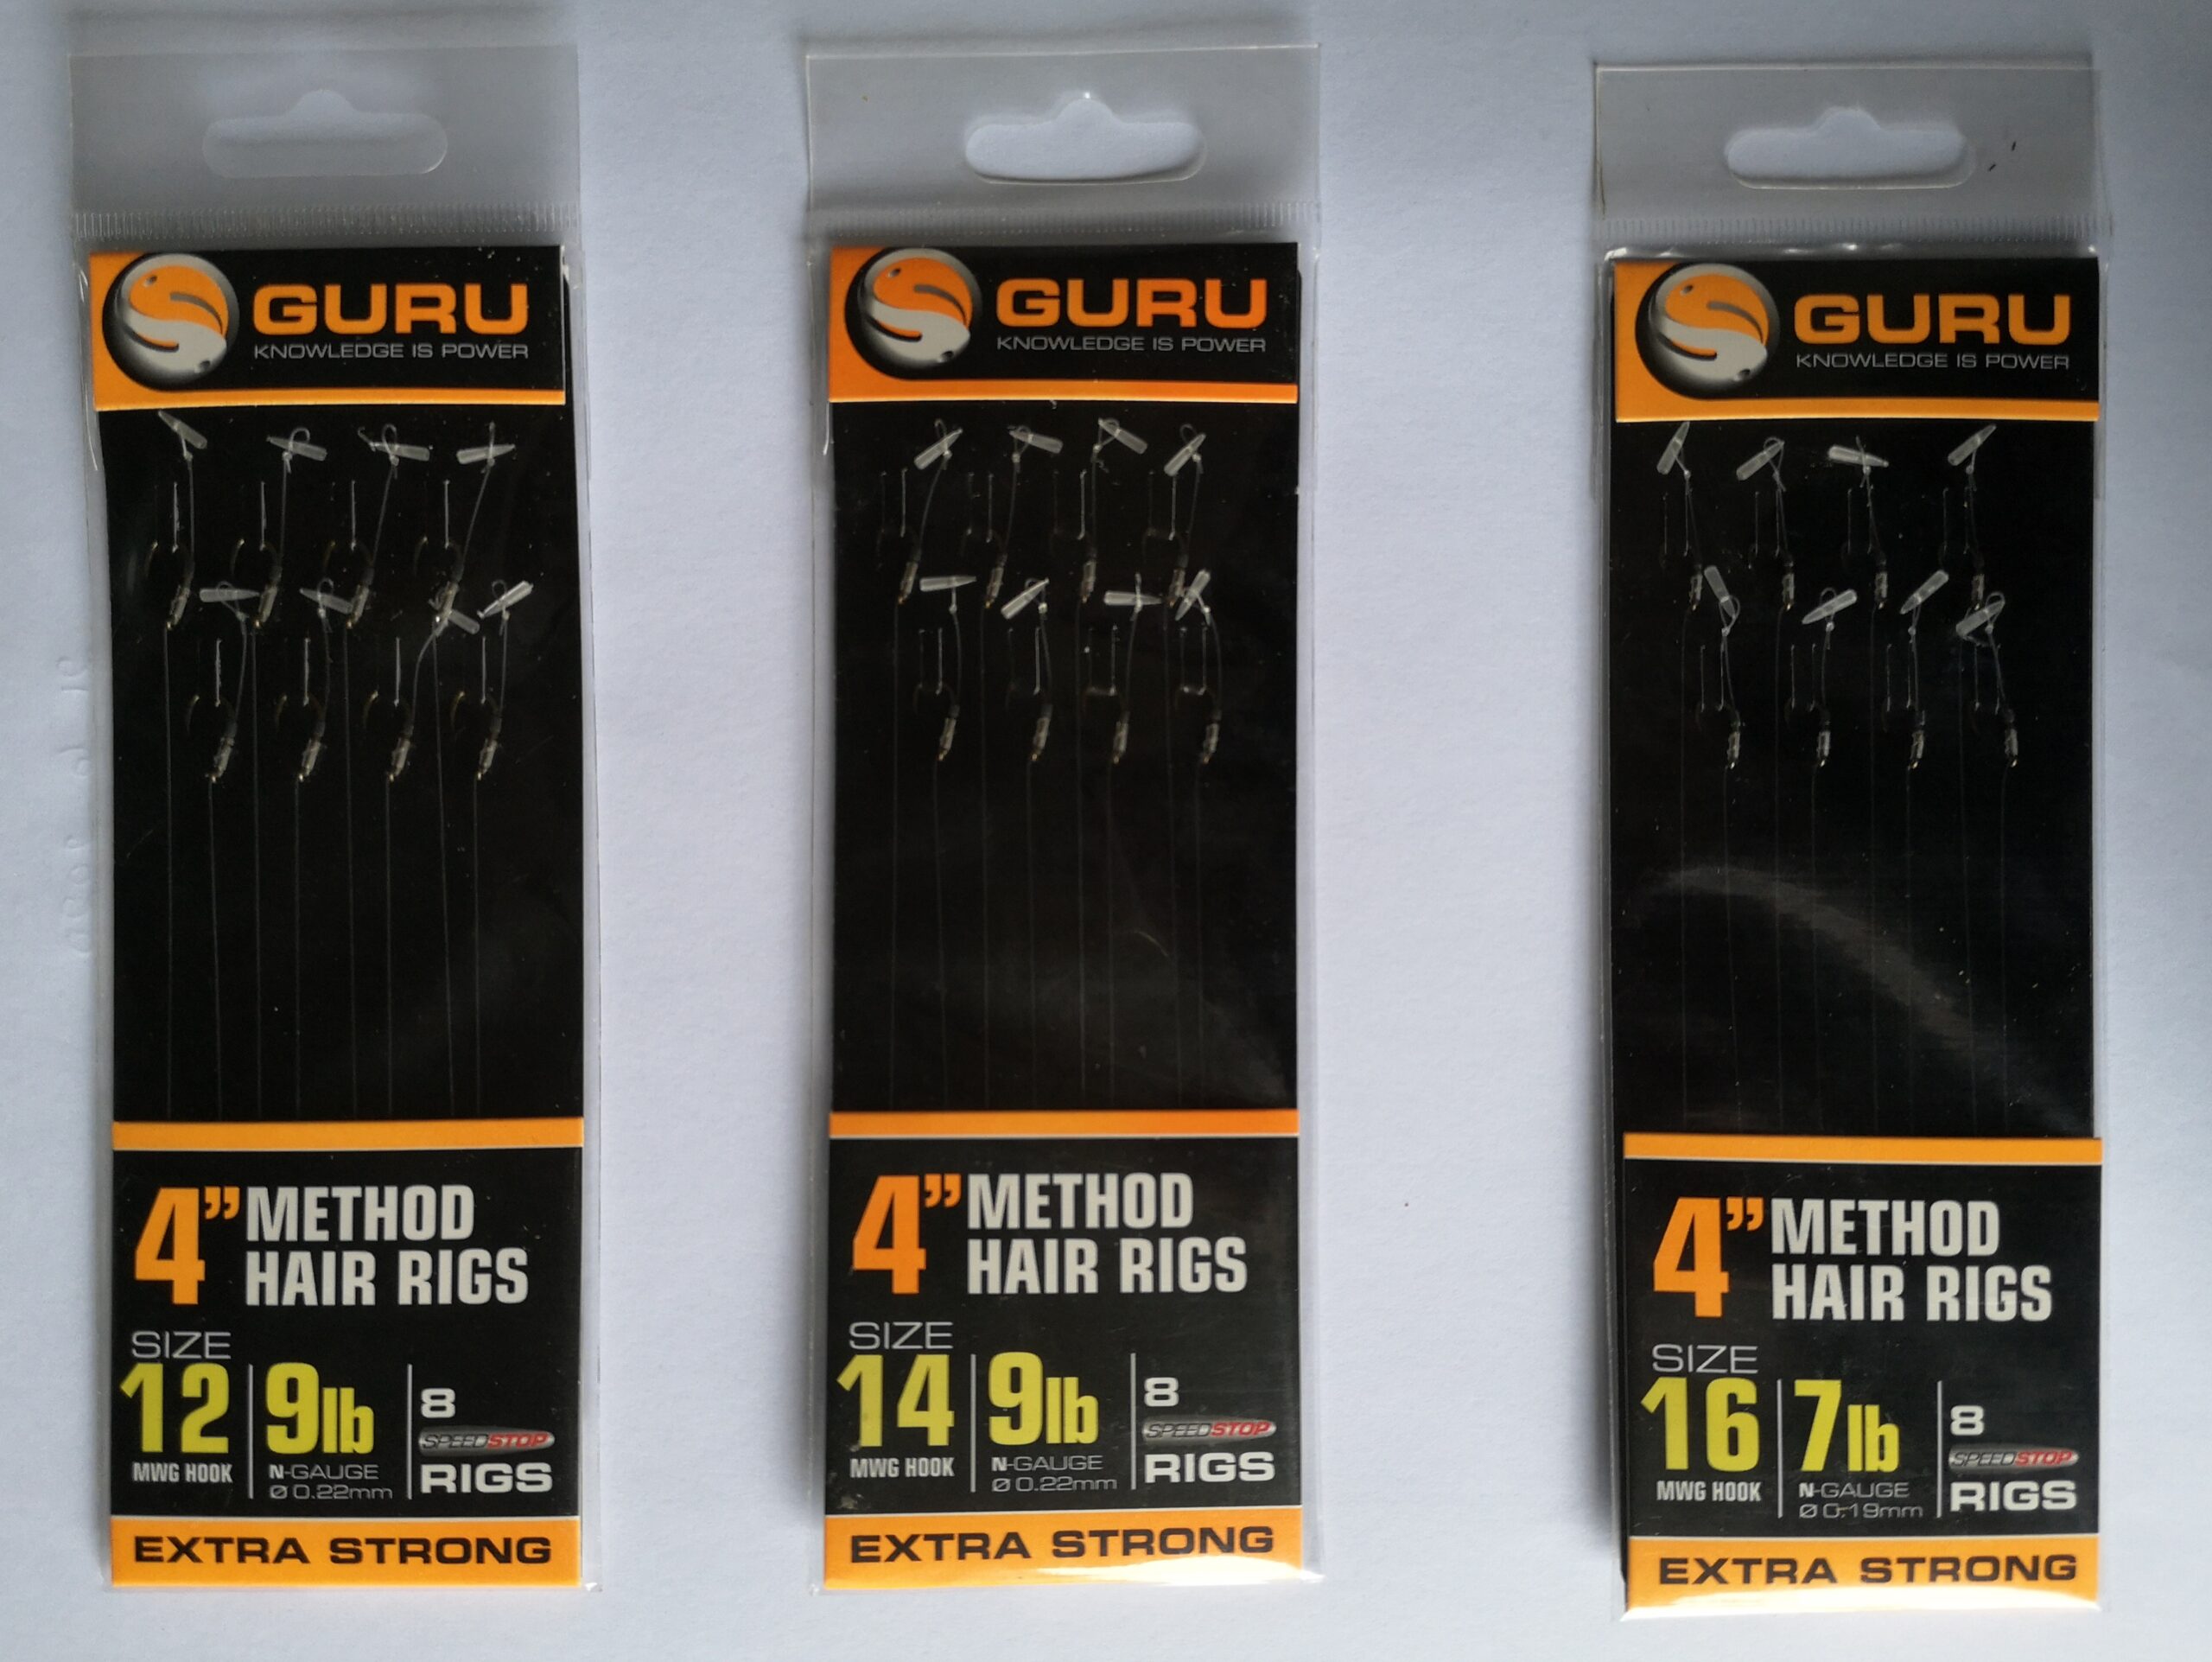 Guru Speed Stops 4 Qm1 Rigs Size 14 to 7lb for sale online 